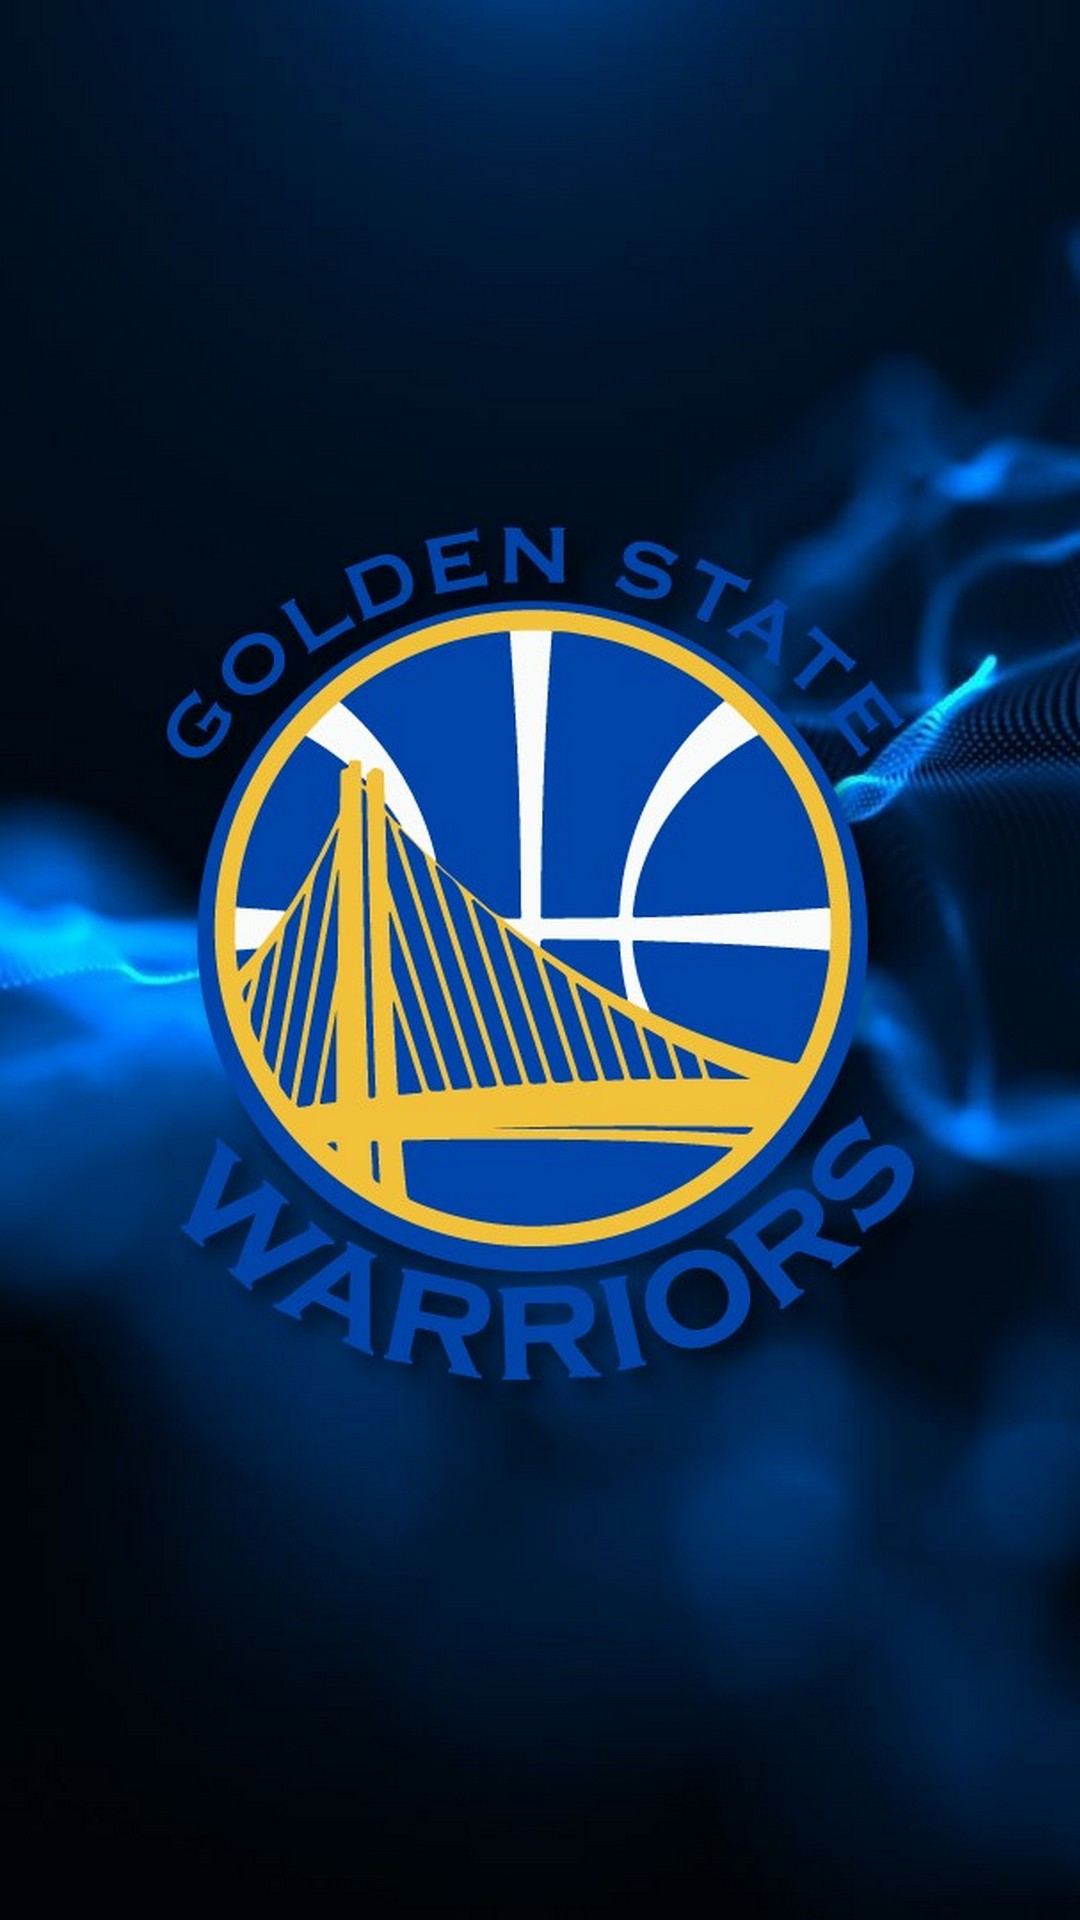 Golden State Warriors iPhone Wallpaper HD With Resolution 1080X1920 pixel. You can make this wallpaper for your Desktop Computer Backgrounds, Mac Wallpapers, Android Lock screen or iPhone Screensavers